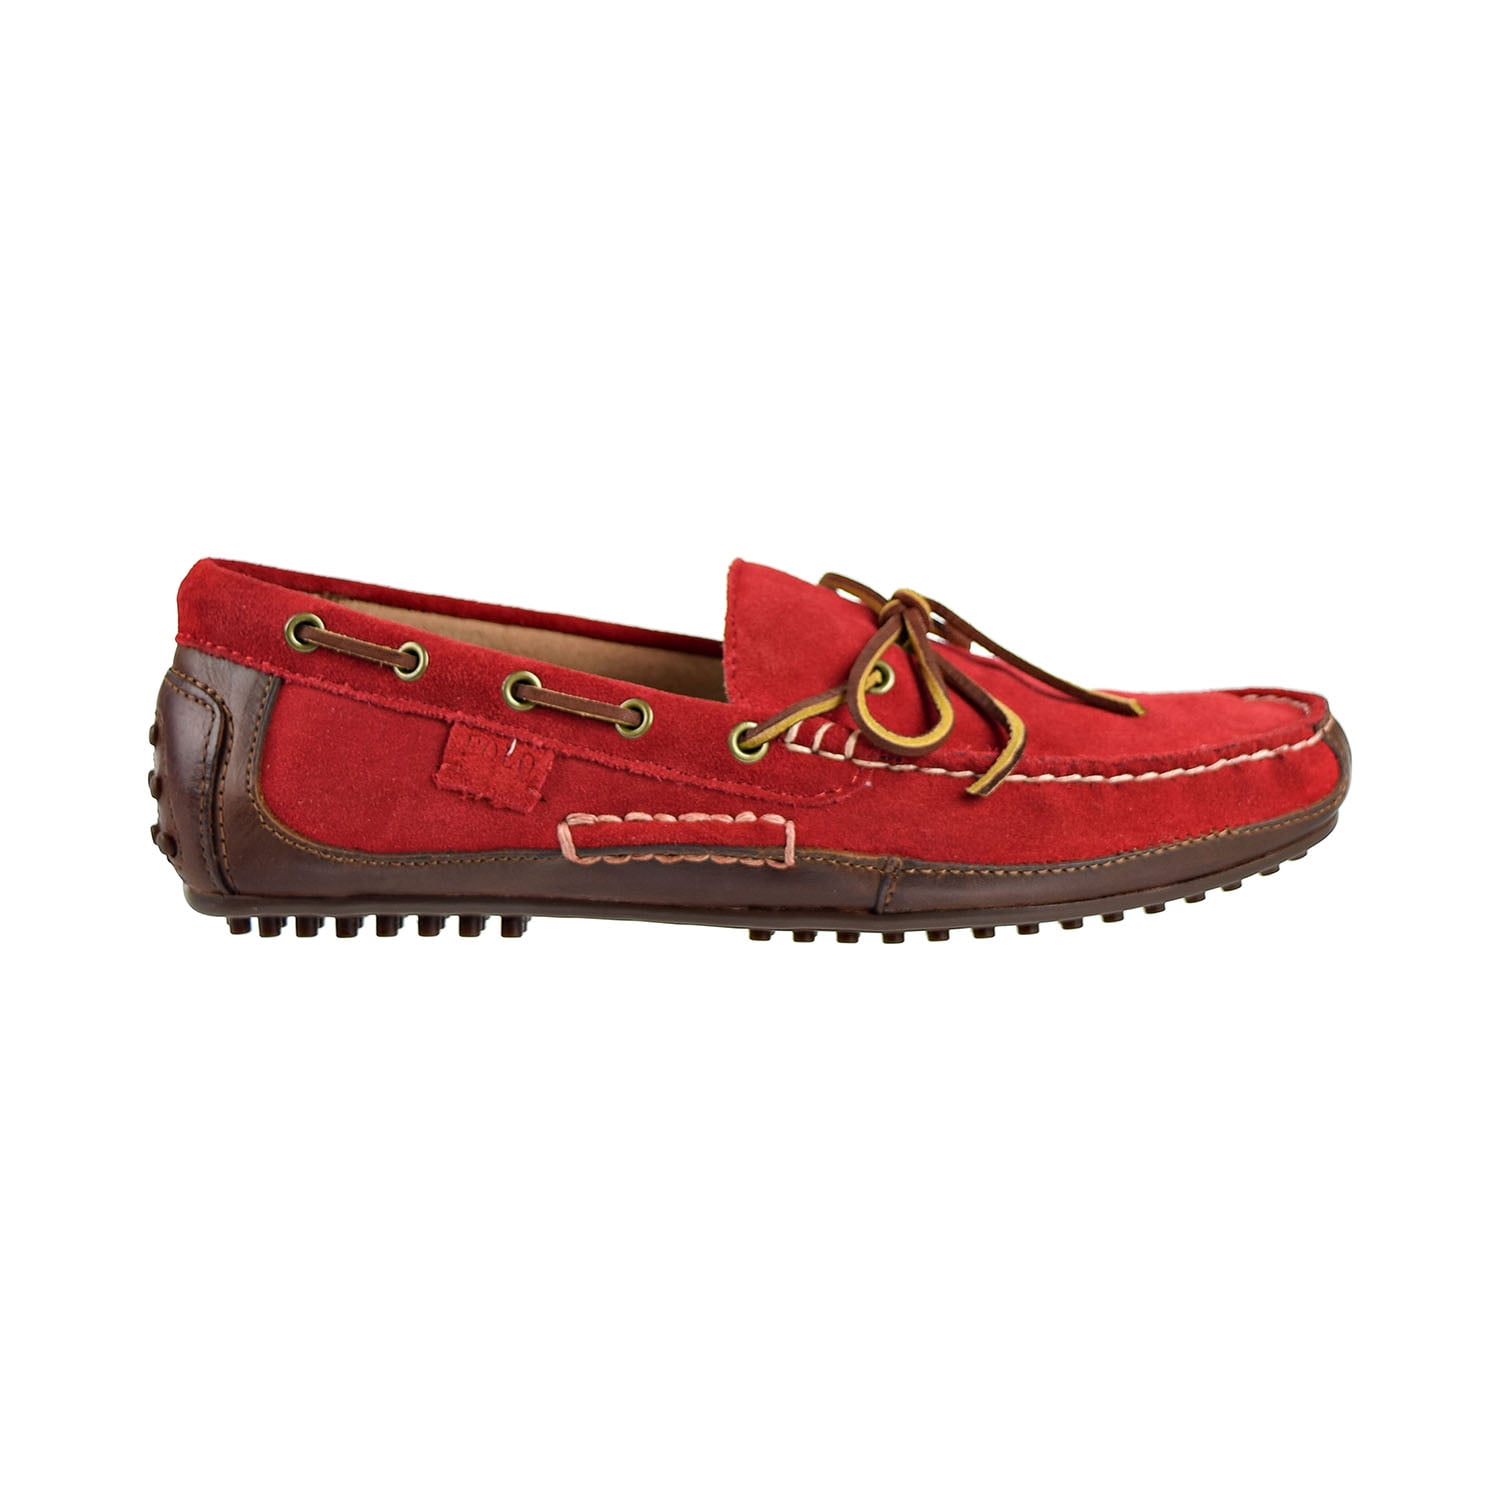 Polo Ralph Lauren Wyndings Slip-On-Driving Mens Loafers Tan/Real Red ...